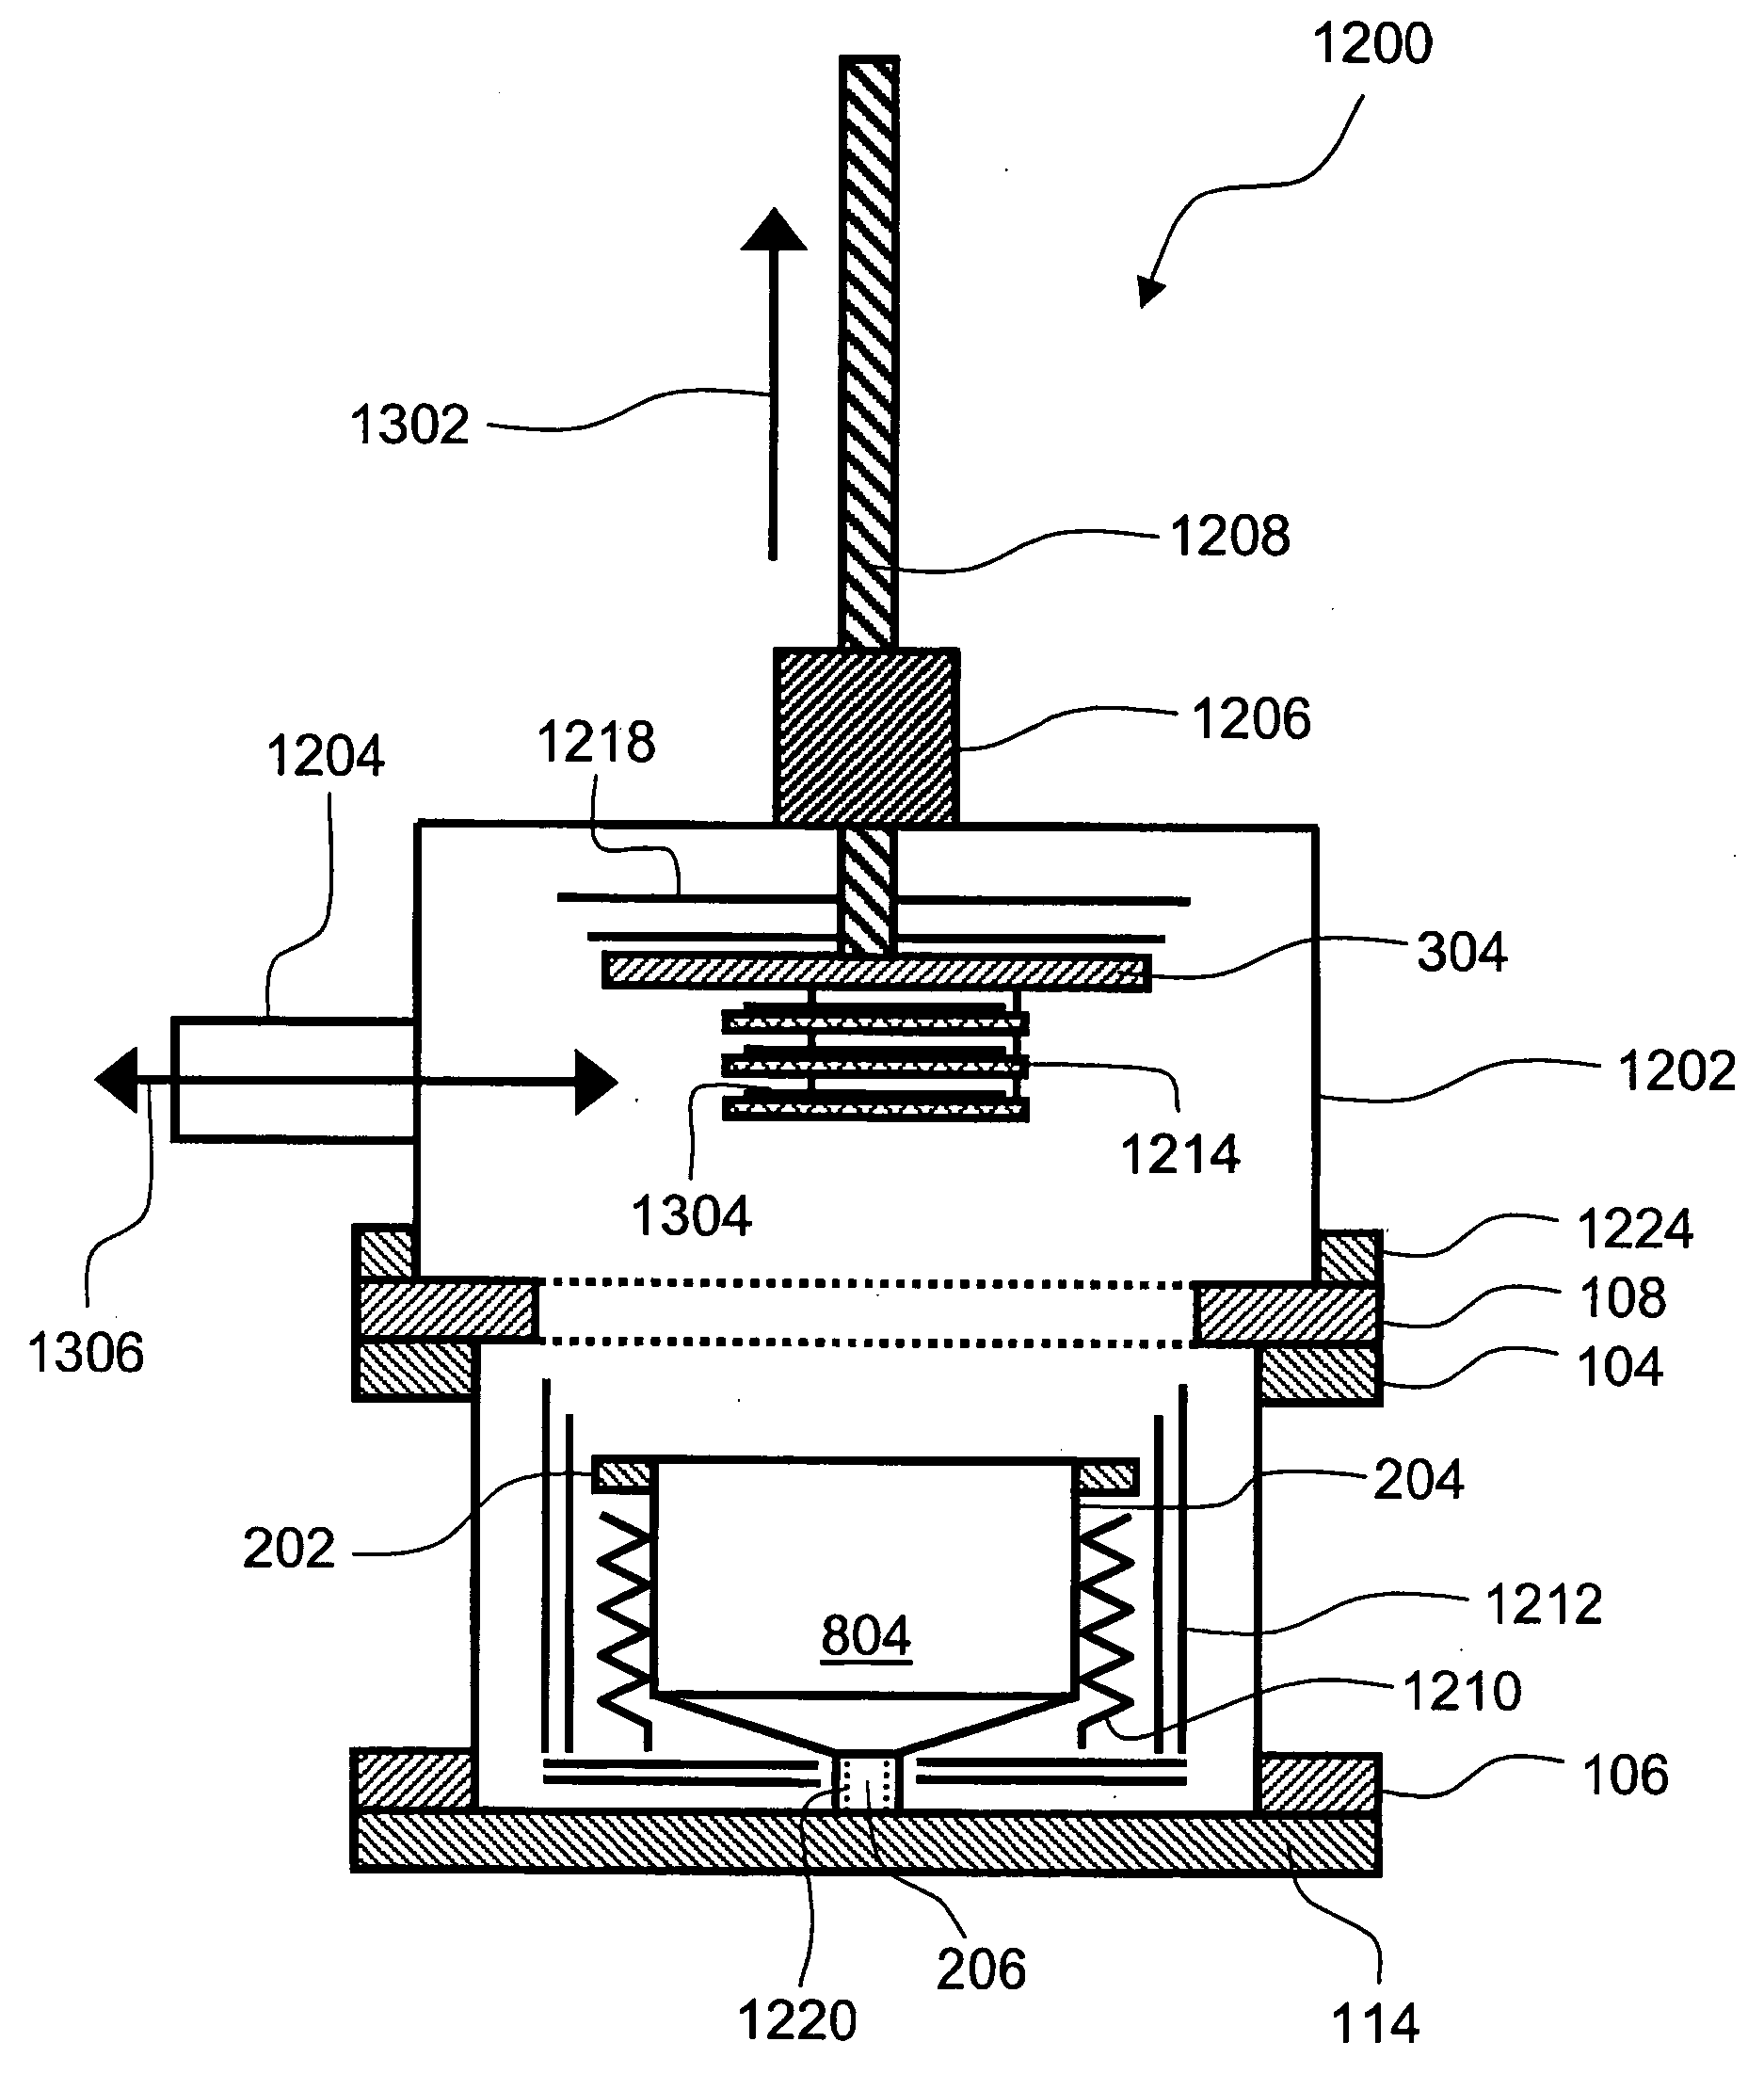 Apparatuses and methods for deposition of material on surfaces